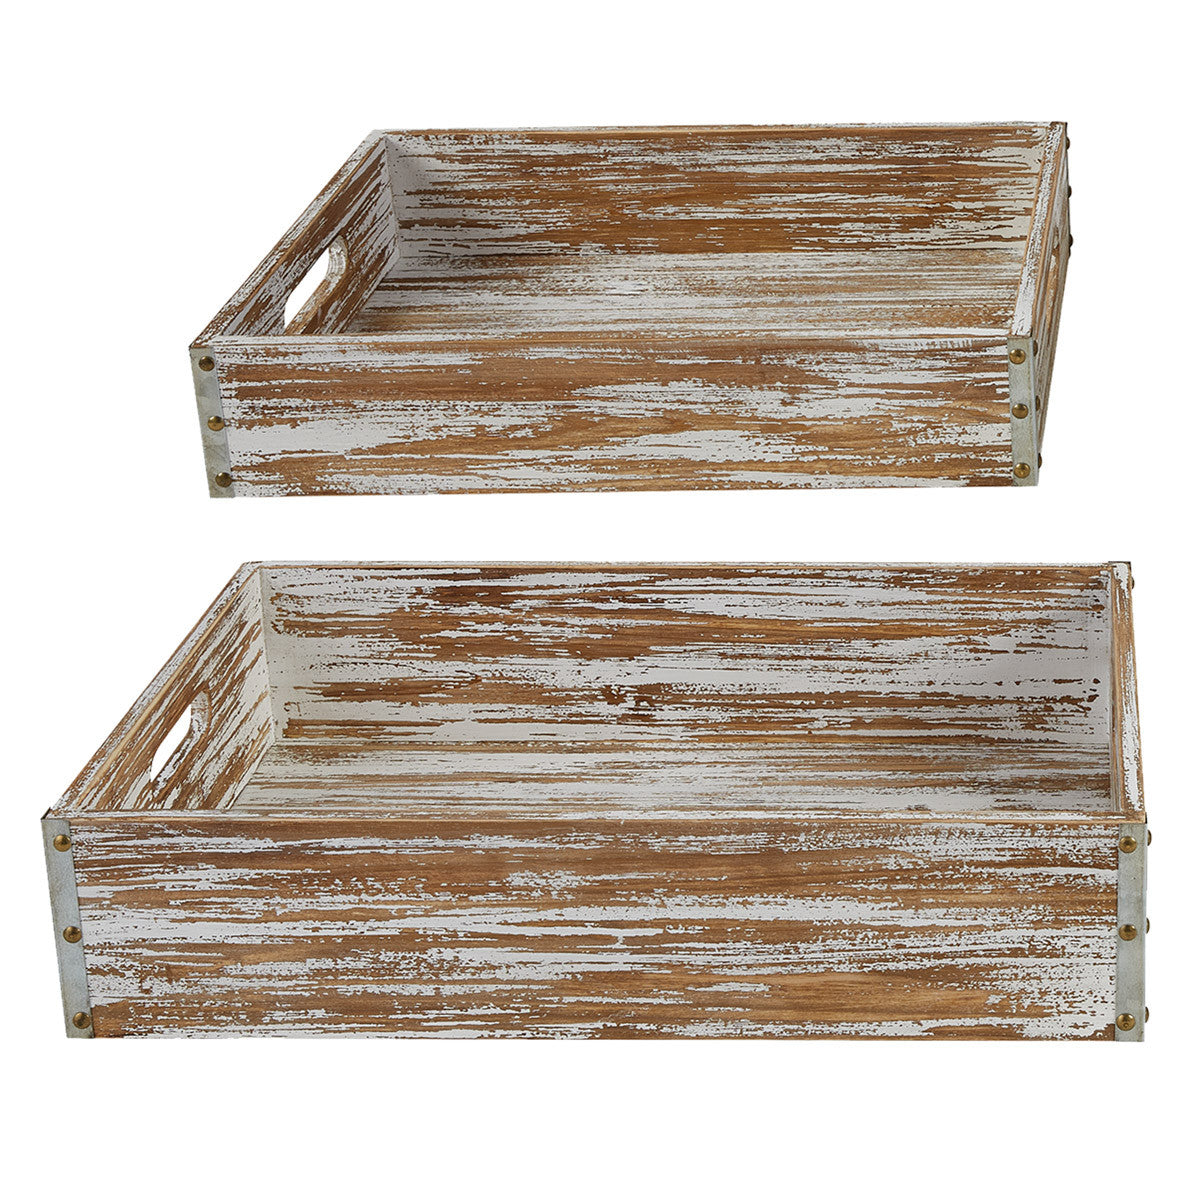 Distressed Wood Table Crates - Set of 2 Park Designs